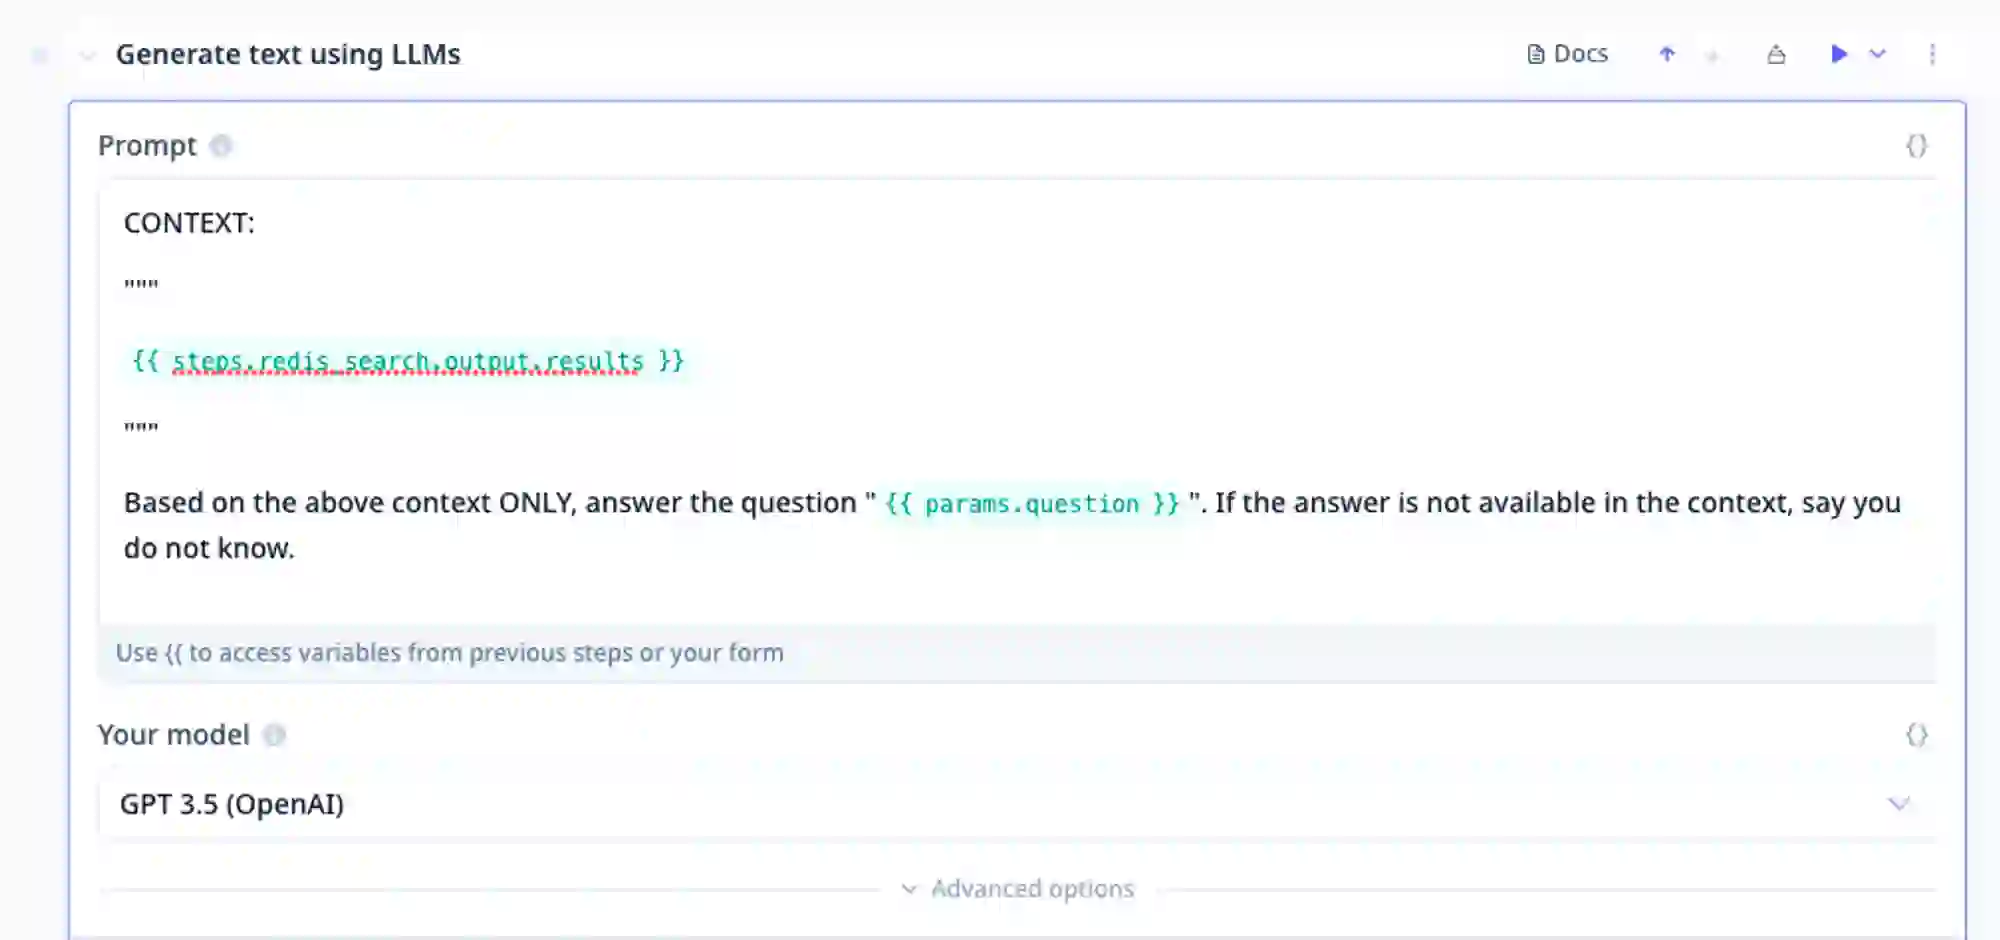 Example of an LLM step that takes the context from Redis Search and Query and asks a question